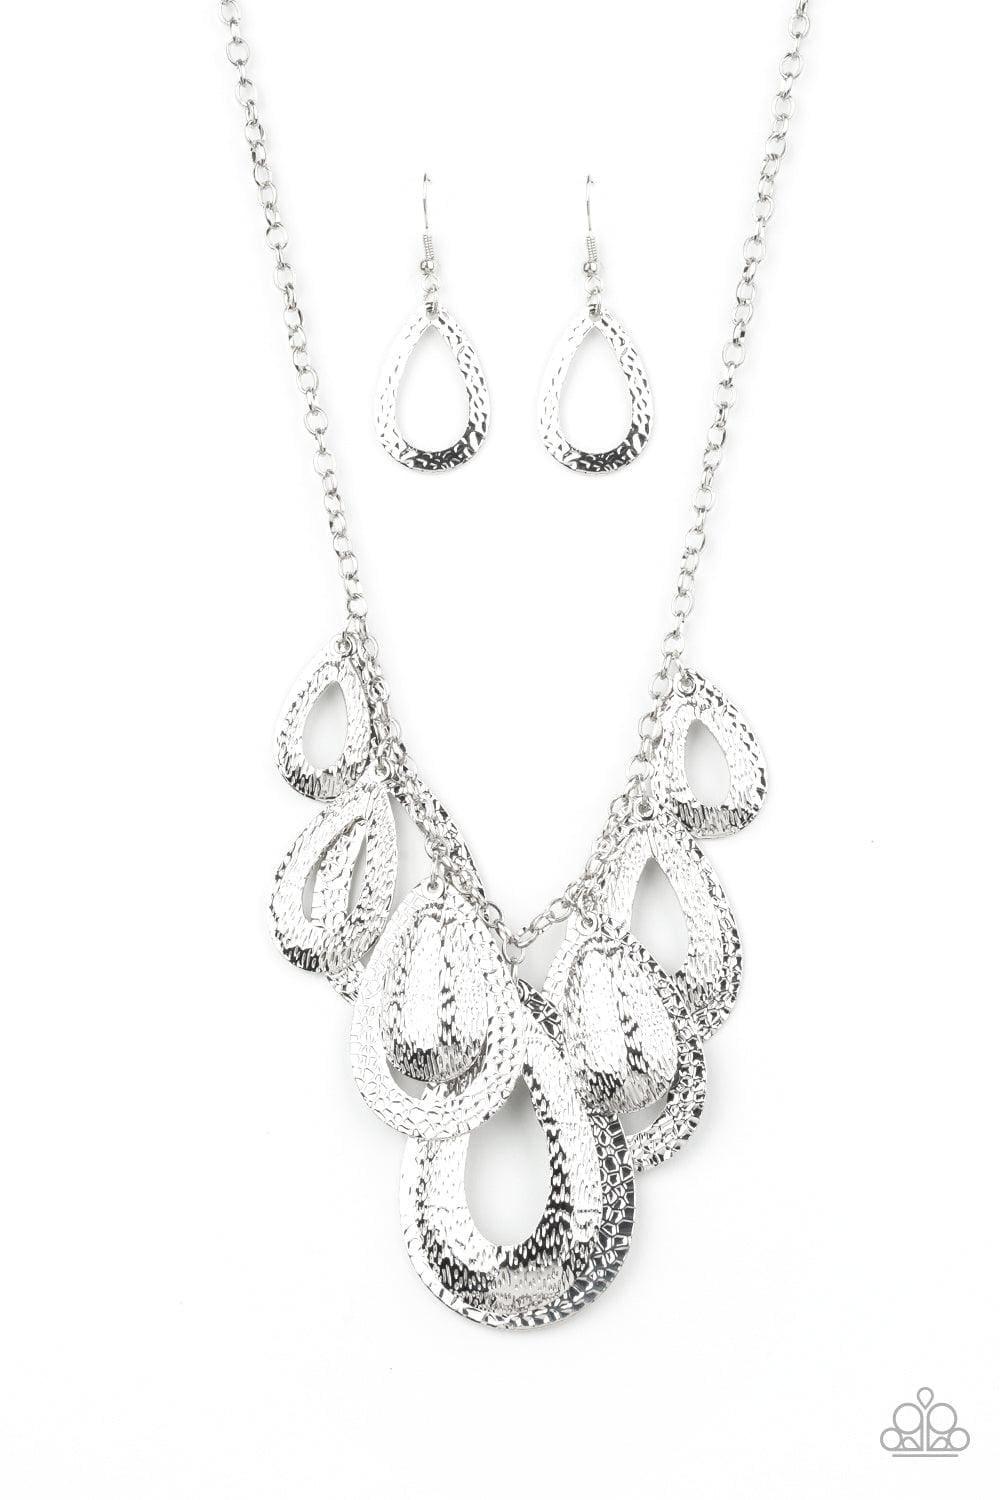 Paparazzi Accessories - Teardrop Tempest - Silver Necklace - Bling by JessieK